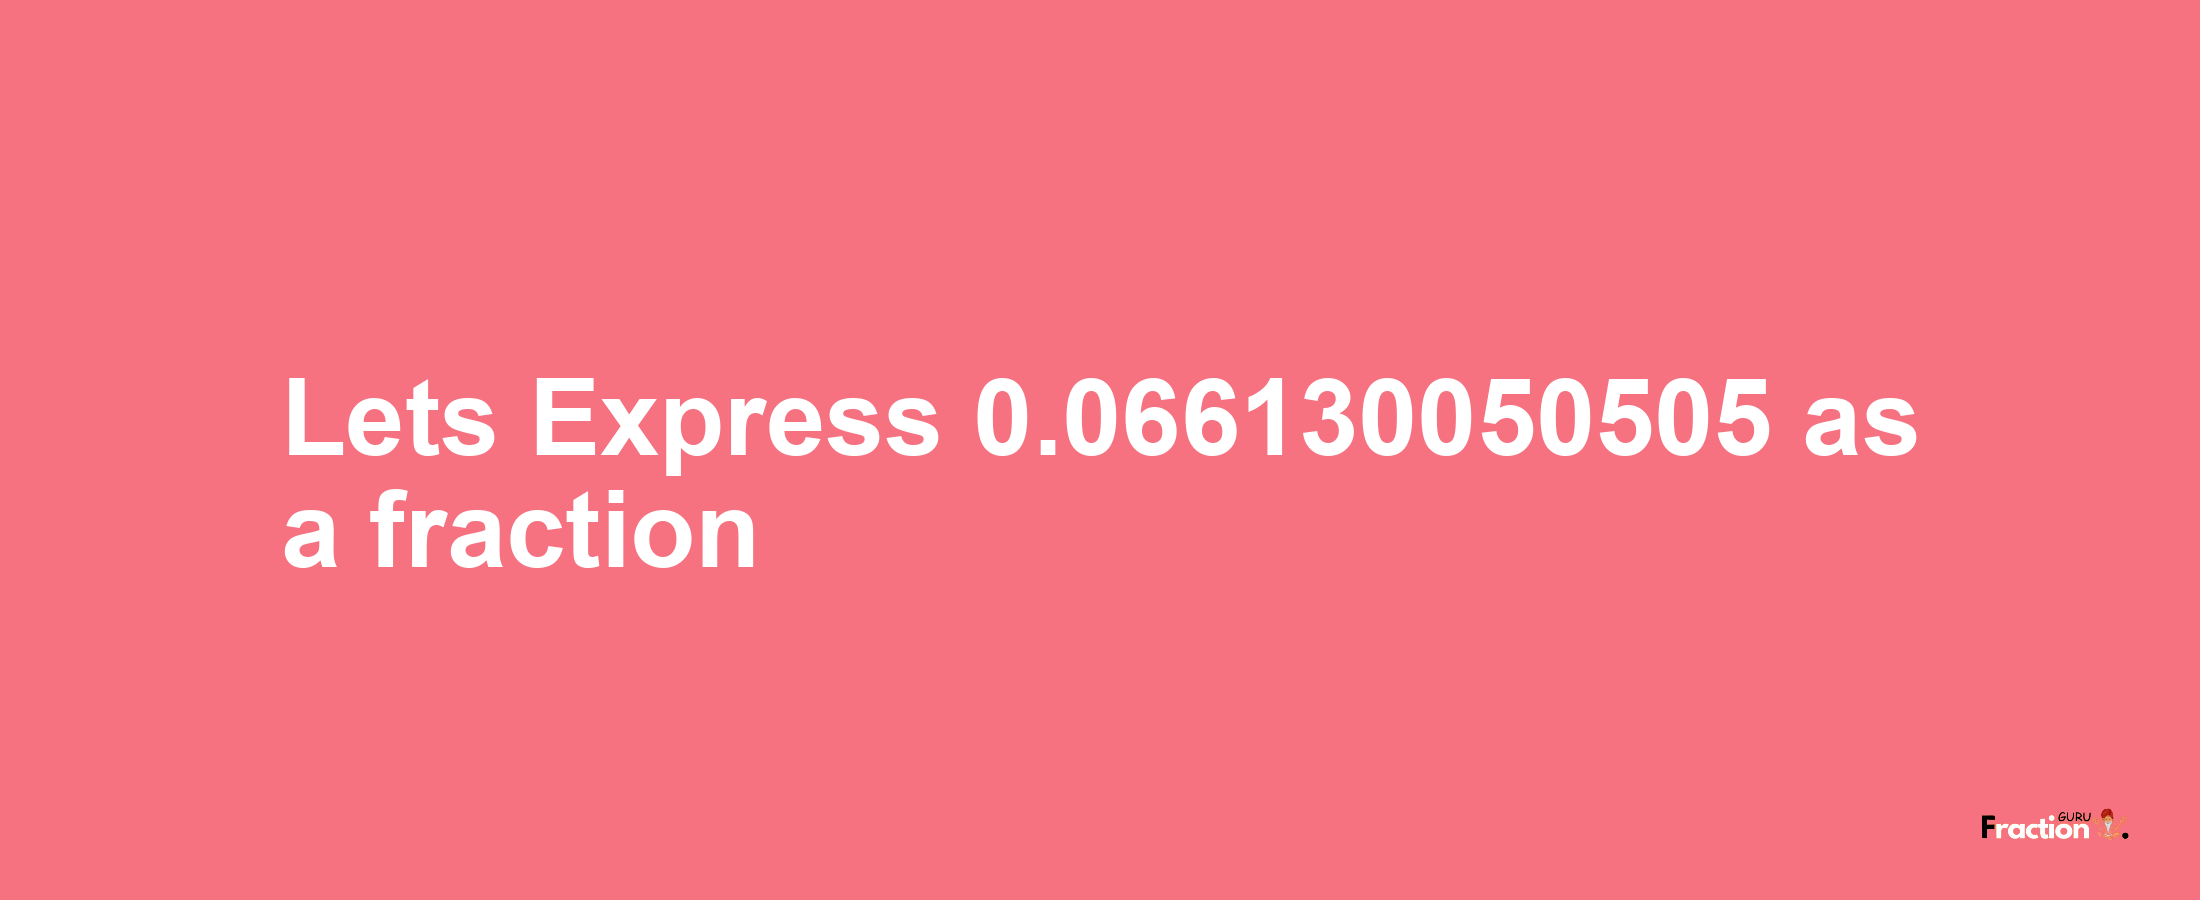 Lets Express 0.066130050505 as afraction